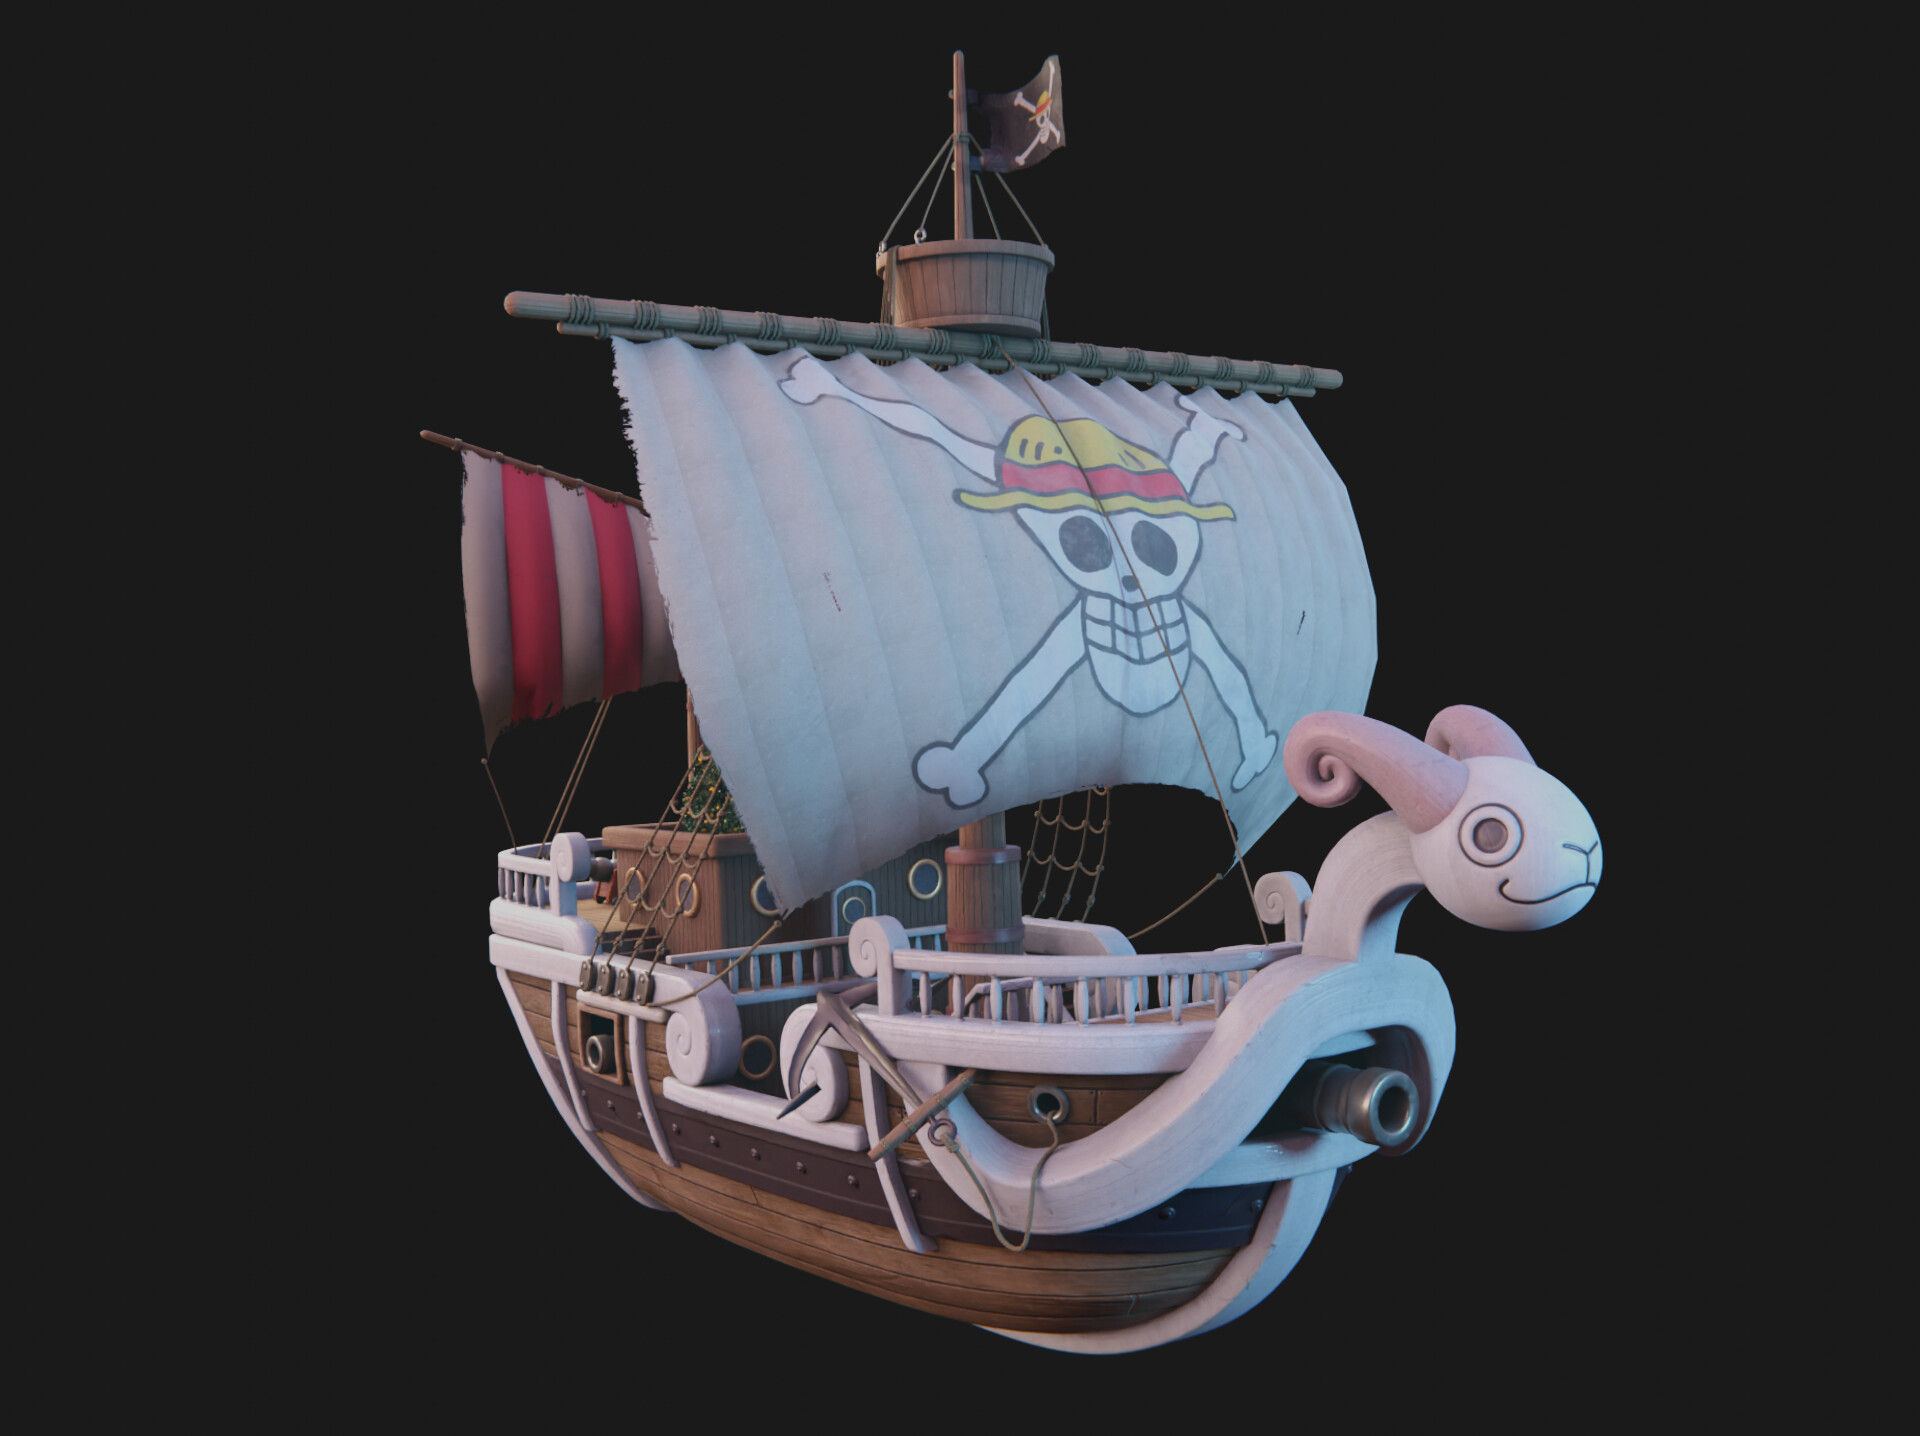 The Going Merry from One Piece (Looking for feedback) - Creations Feedback  - Developer Forum